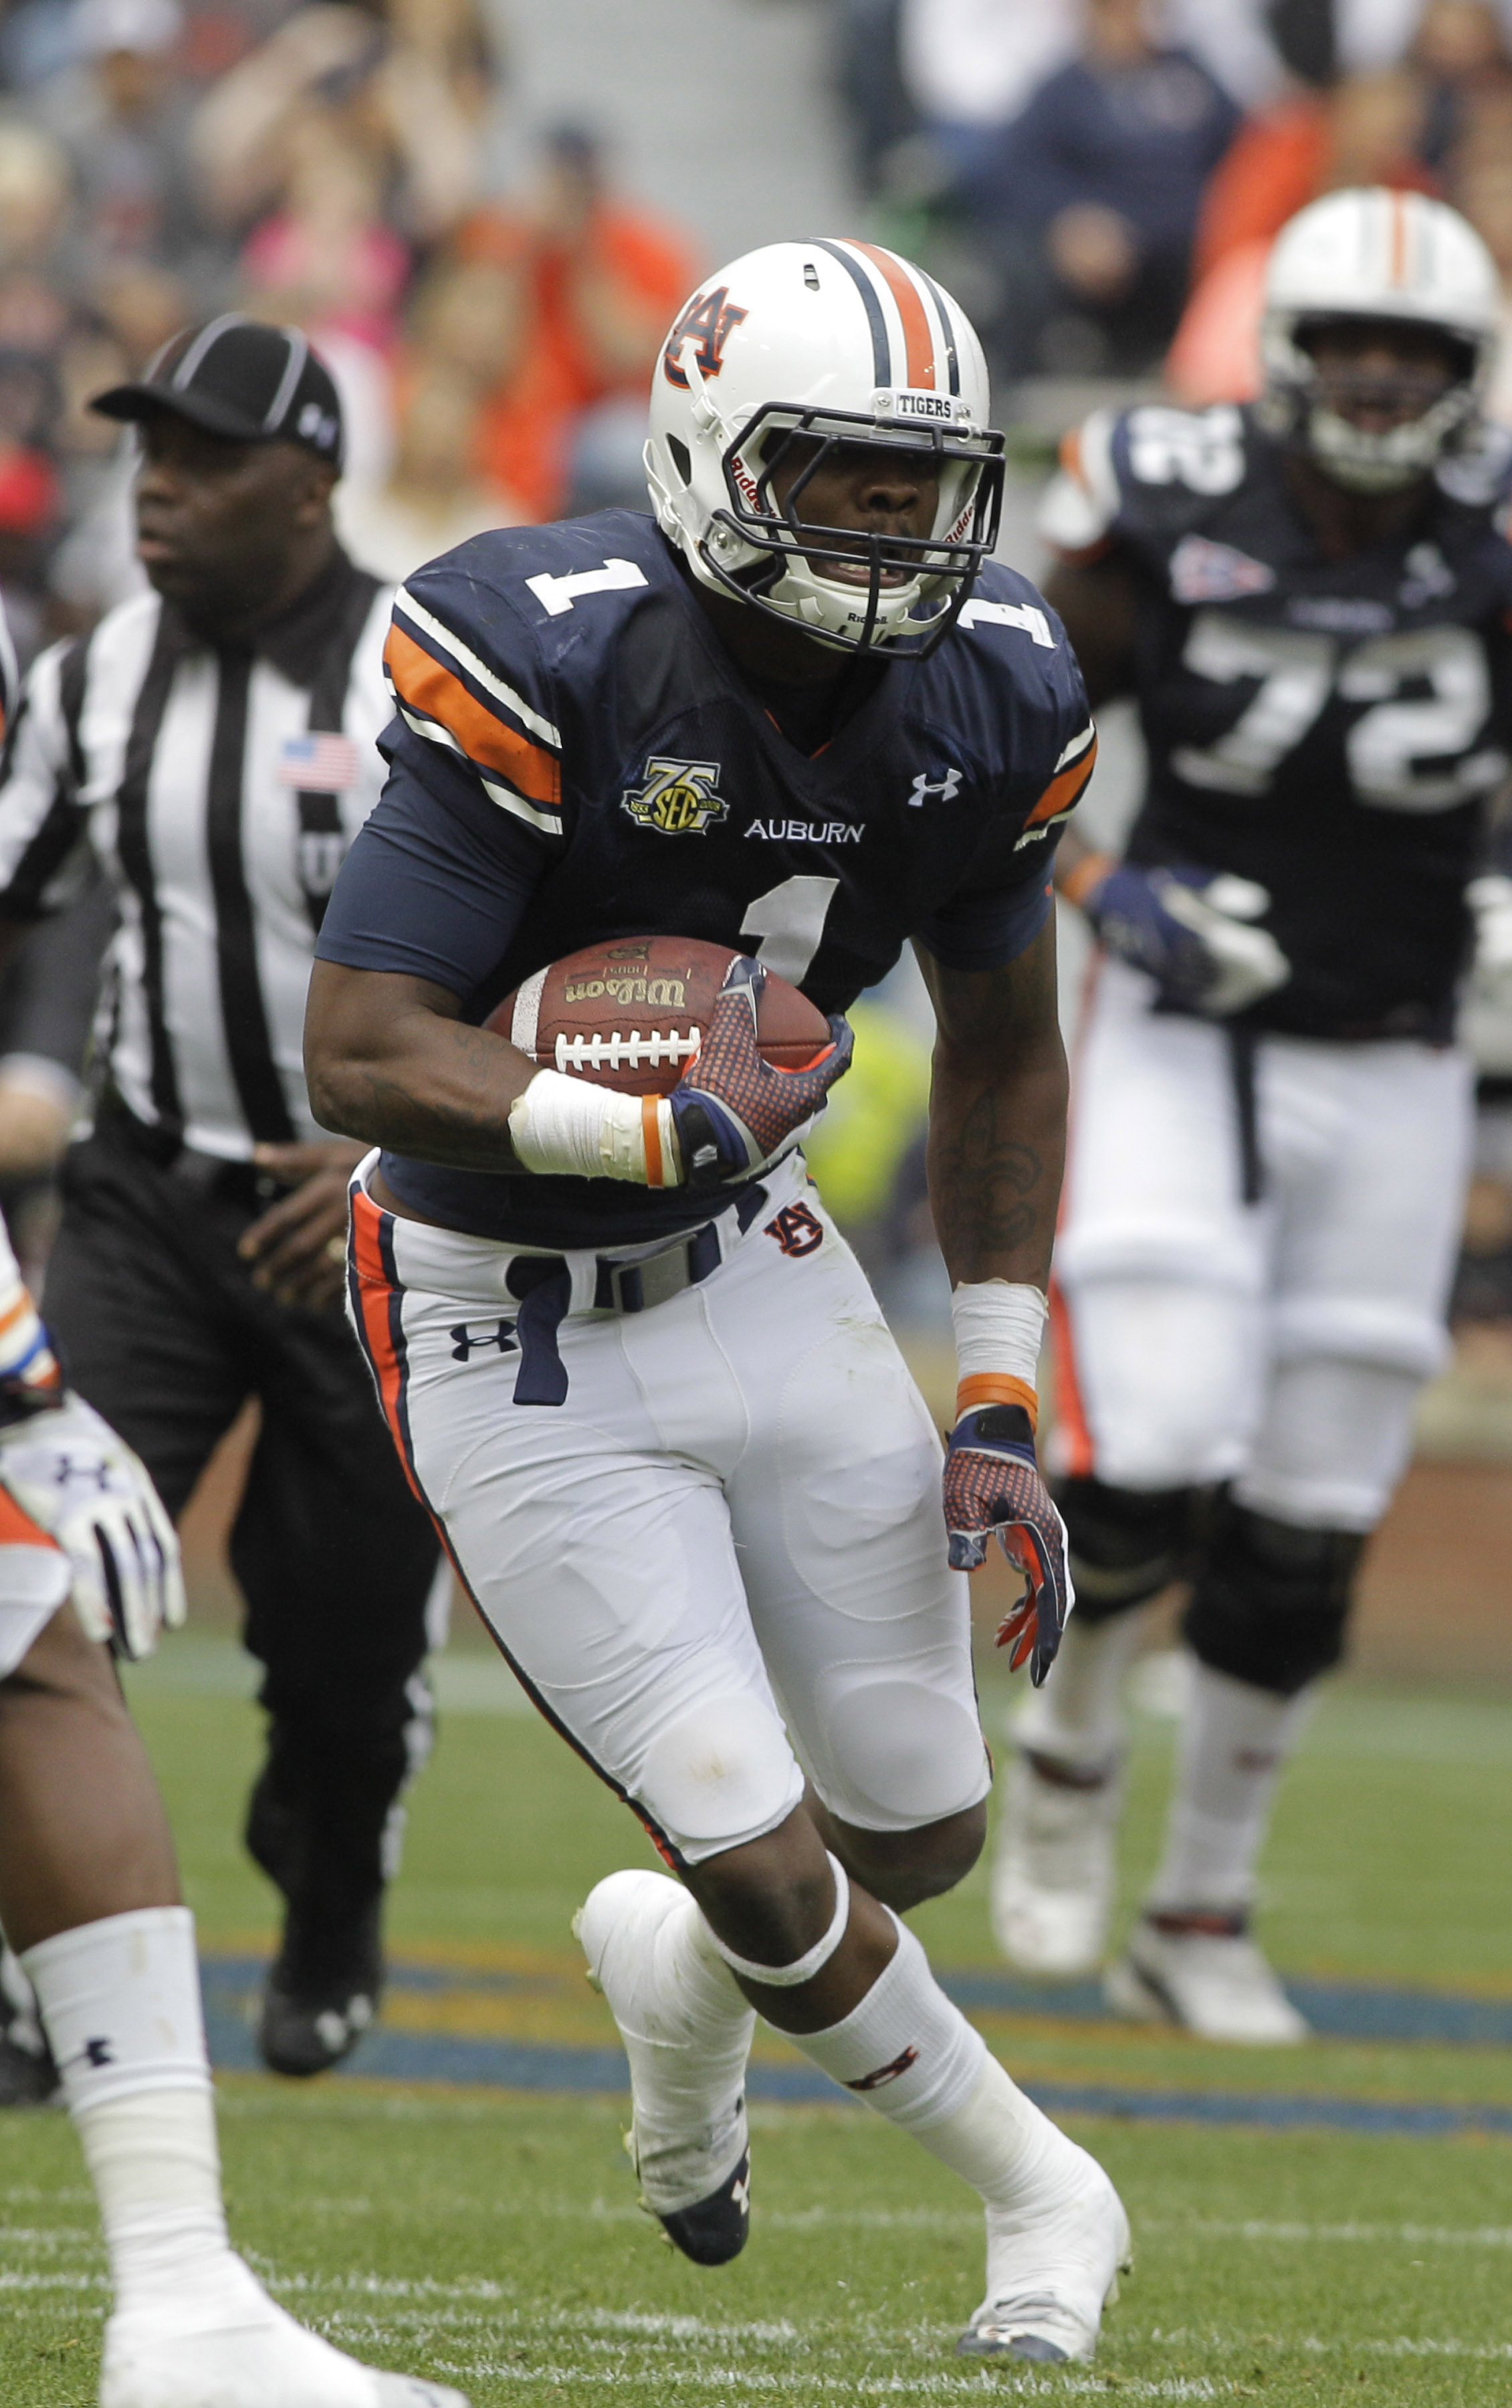 Auburn receiver D'haquille Williams. (John Reed/USA TODAY Sports)